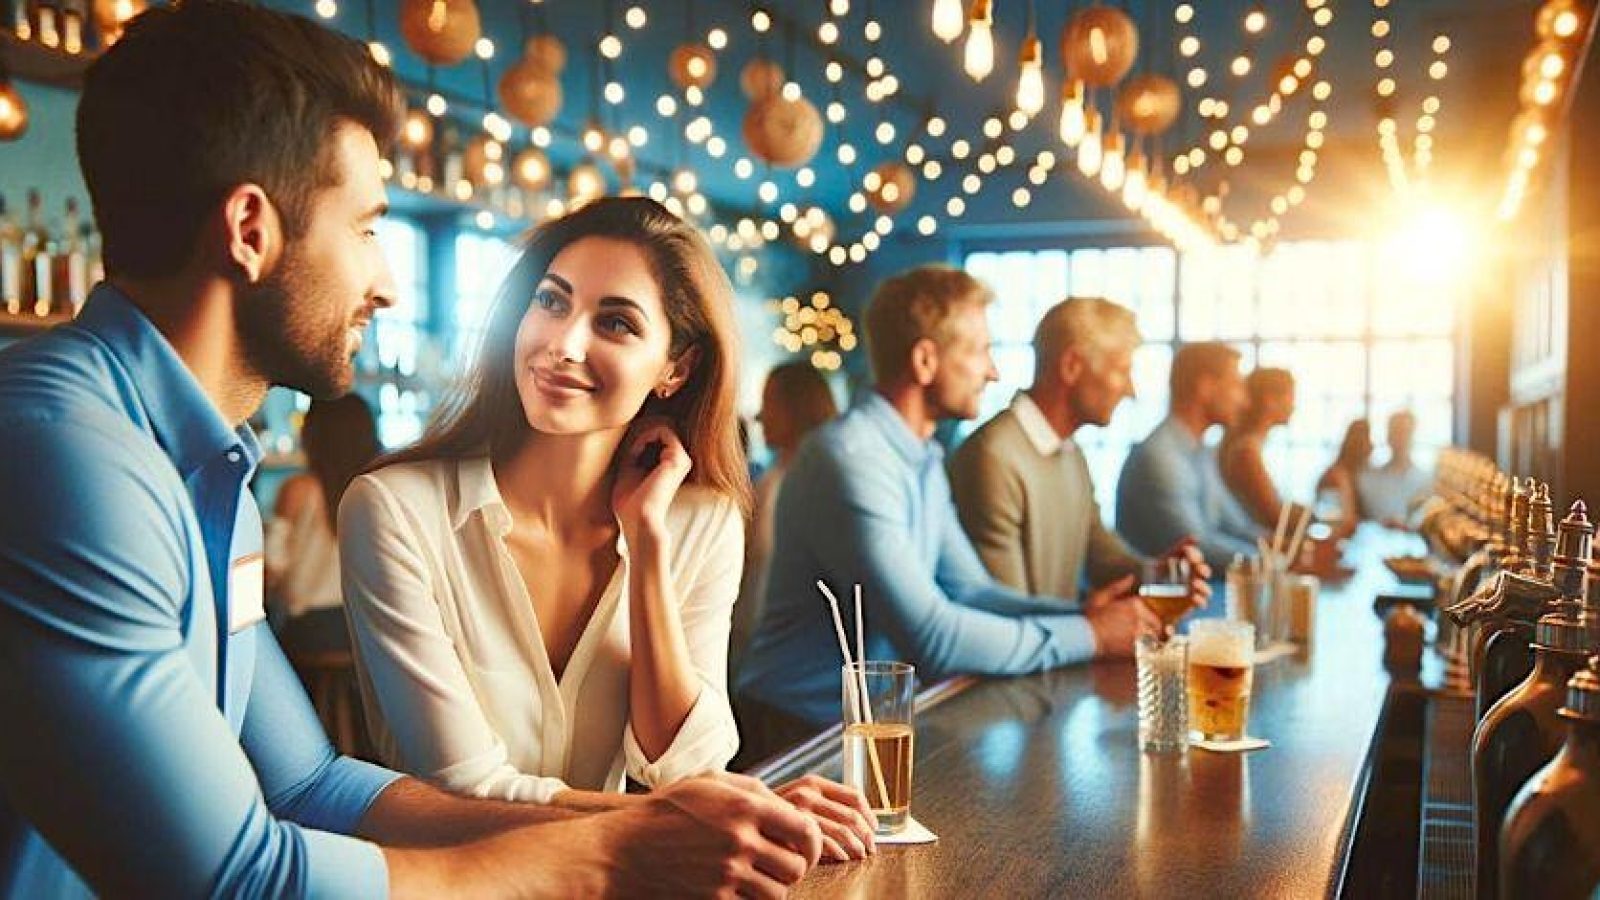 singles meeting at over 50s speed dating night in a bar